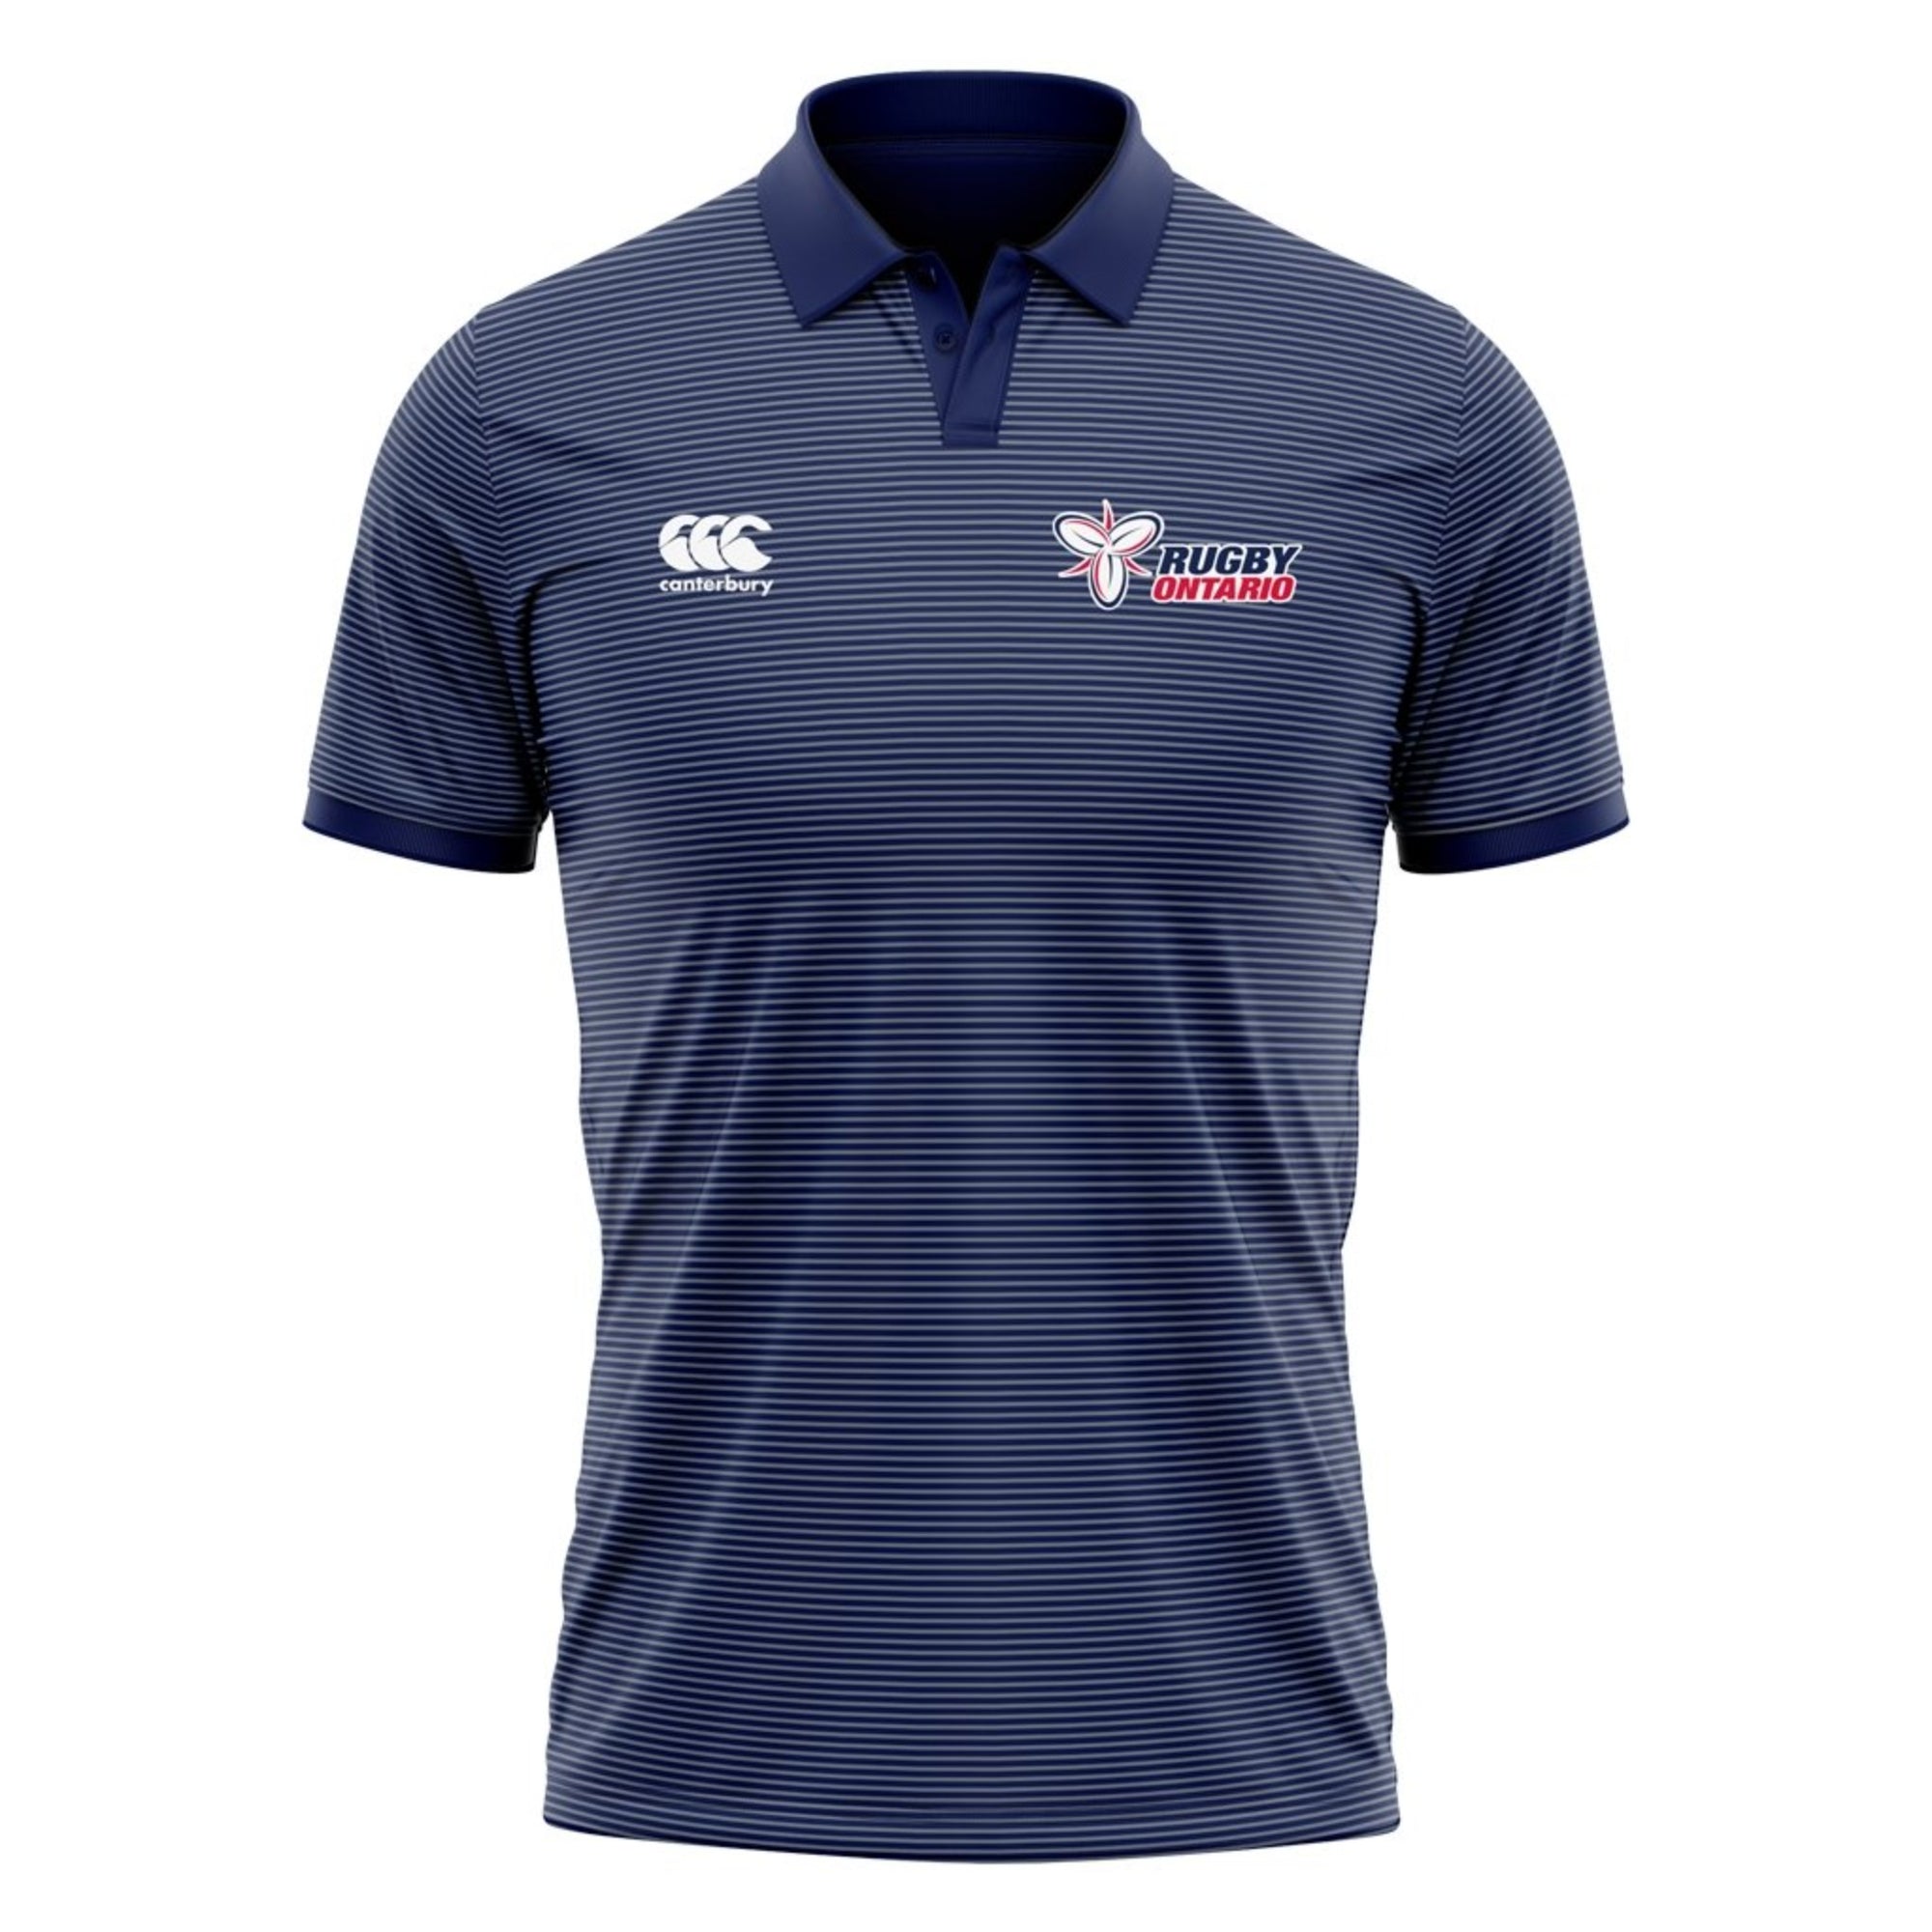 Rugby Ontario CCC Pinstripe Performance Polo - Women's - www.therugbyshop.com www.therugbyshop.com WOMEN'S / NAVY / W6 TRS Distribution Canada POLO Rugby Ontario CCC Pinstripe Performance Polo - Women's